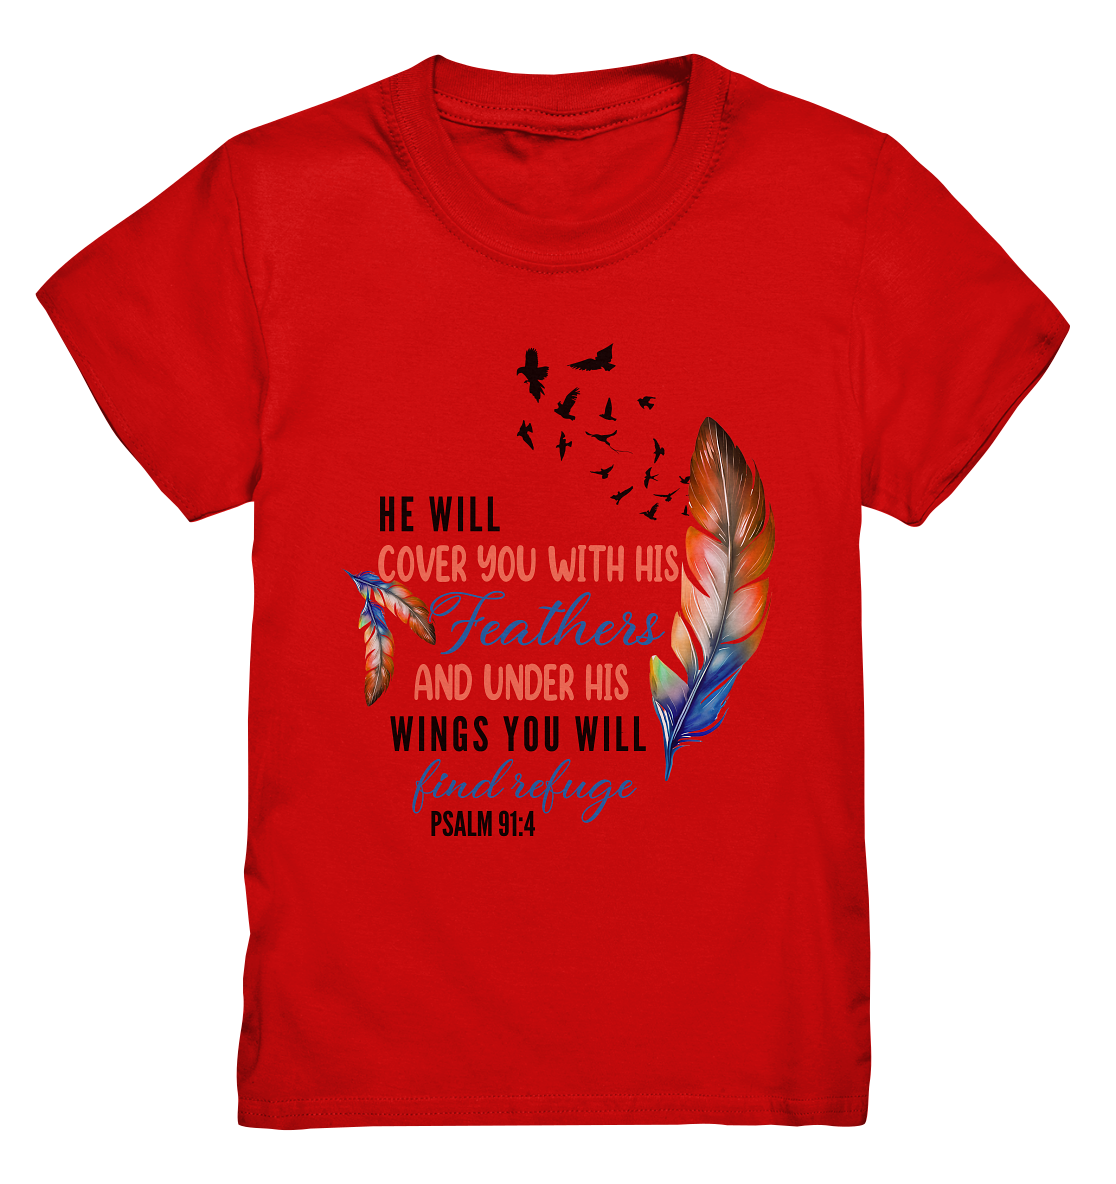 Psalm 91:4 - He will cover you with his Feathers - Kids Premium Shirt